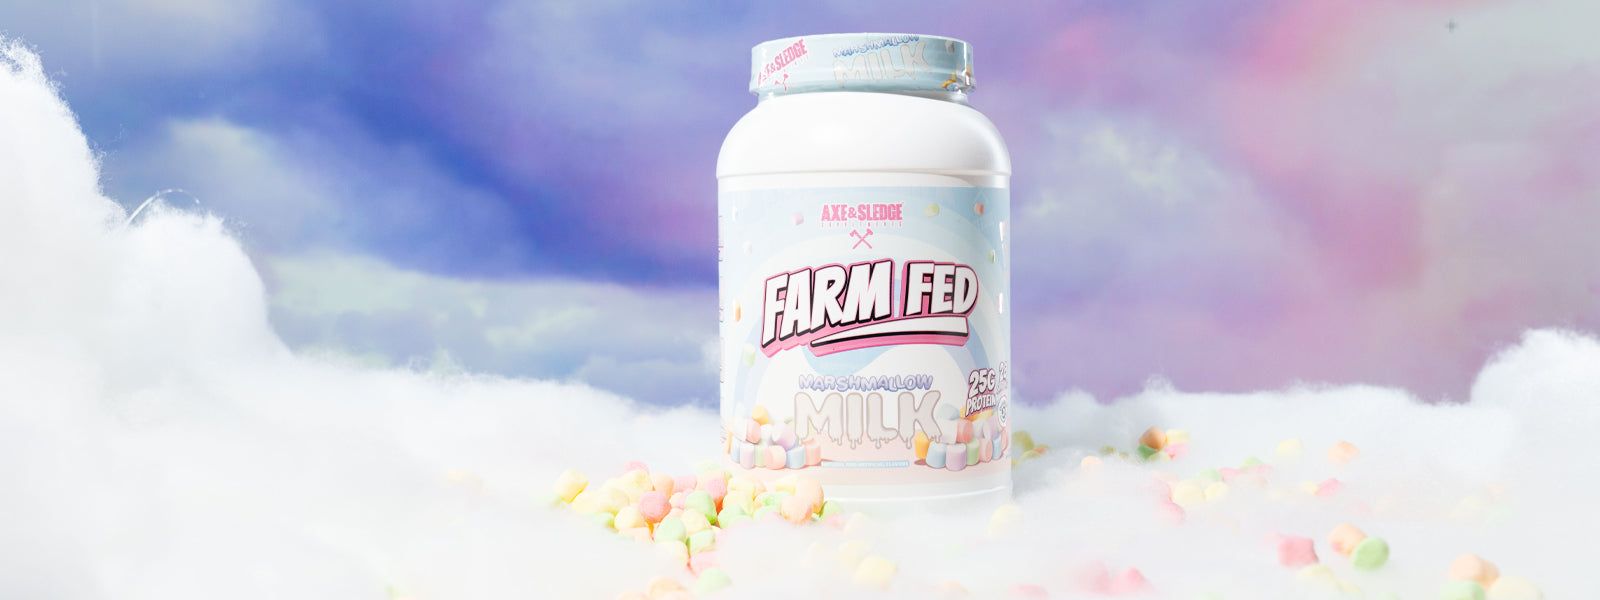 The newest flavor from Axe and Sledge is a Marshmallow Milk Farm Fed protein powder, which is a blend of sweet miniature marshmallows and creamy milk, all in the form of a supremely lean source of protein.